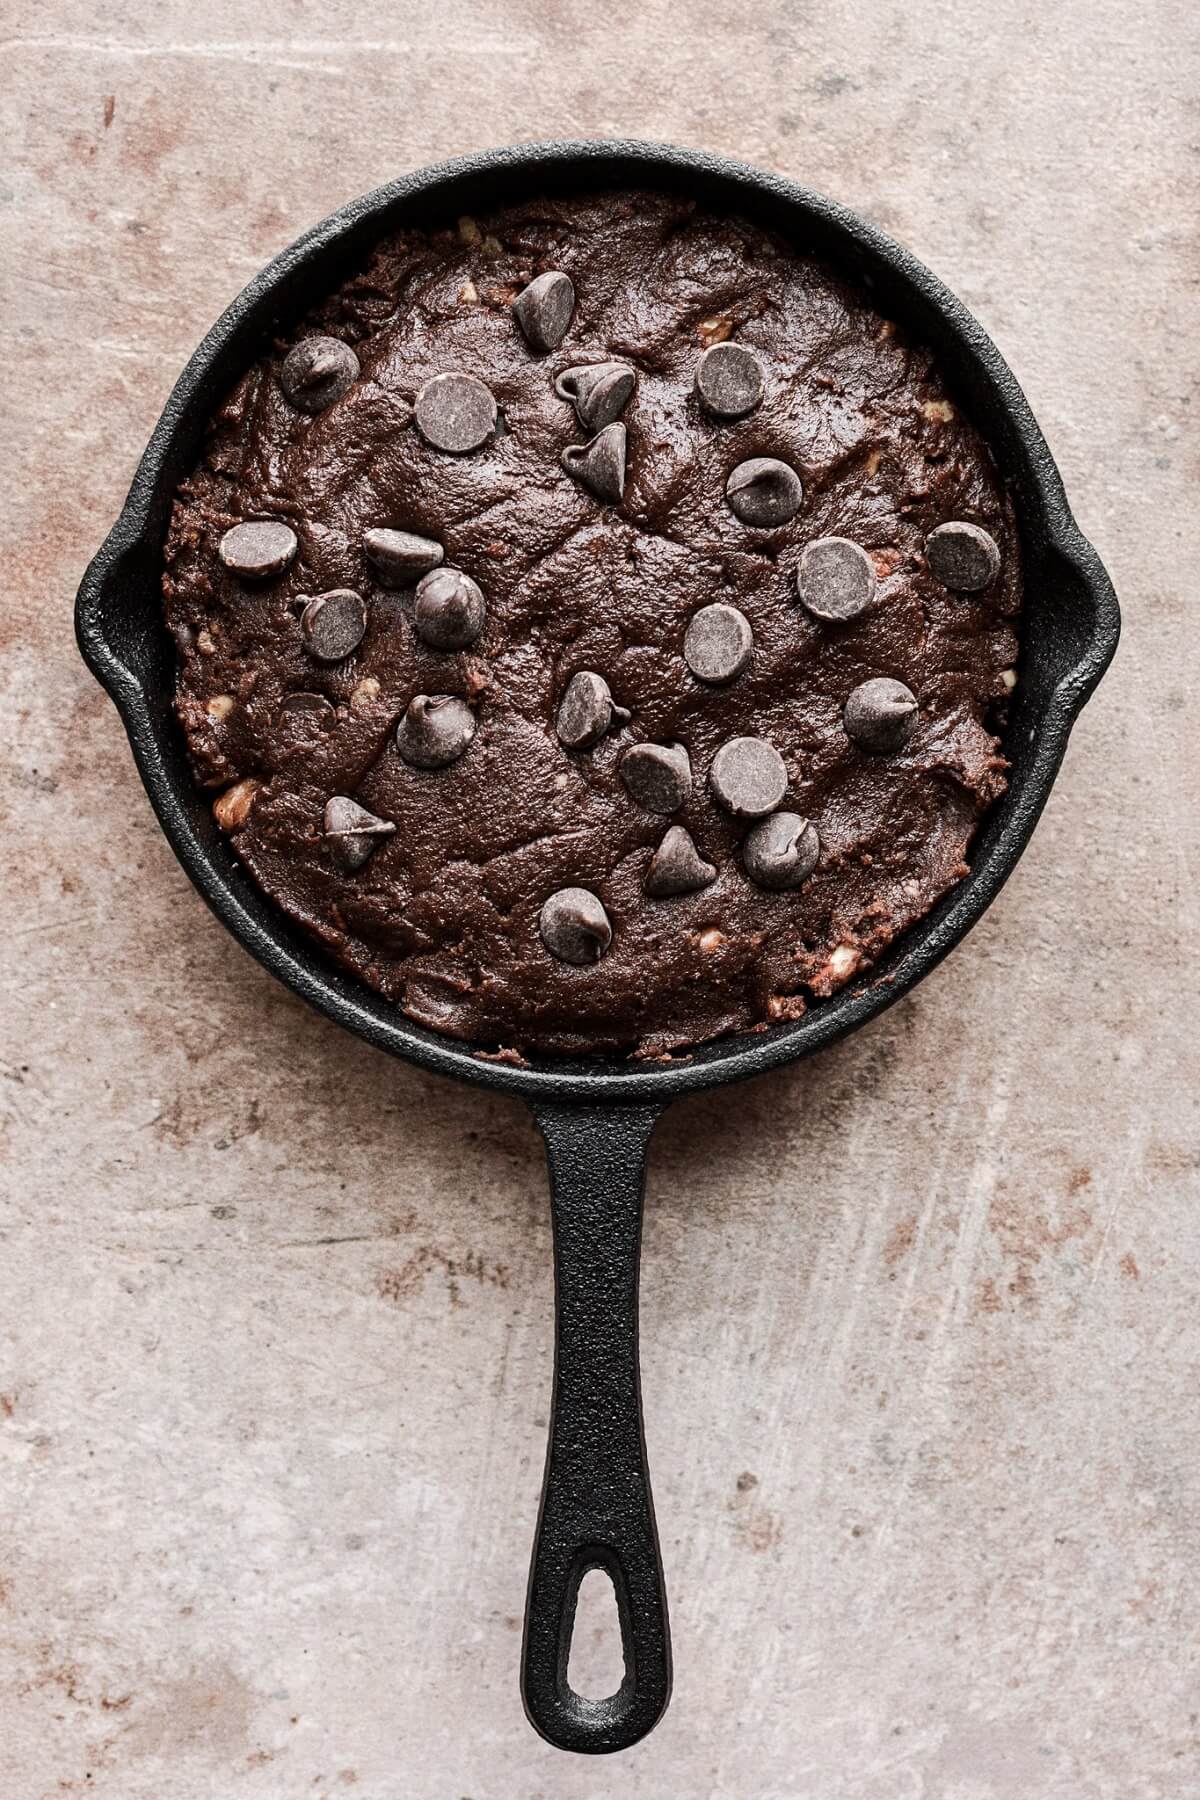 Double chocolate cookie dough in a mini skillet.